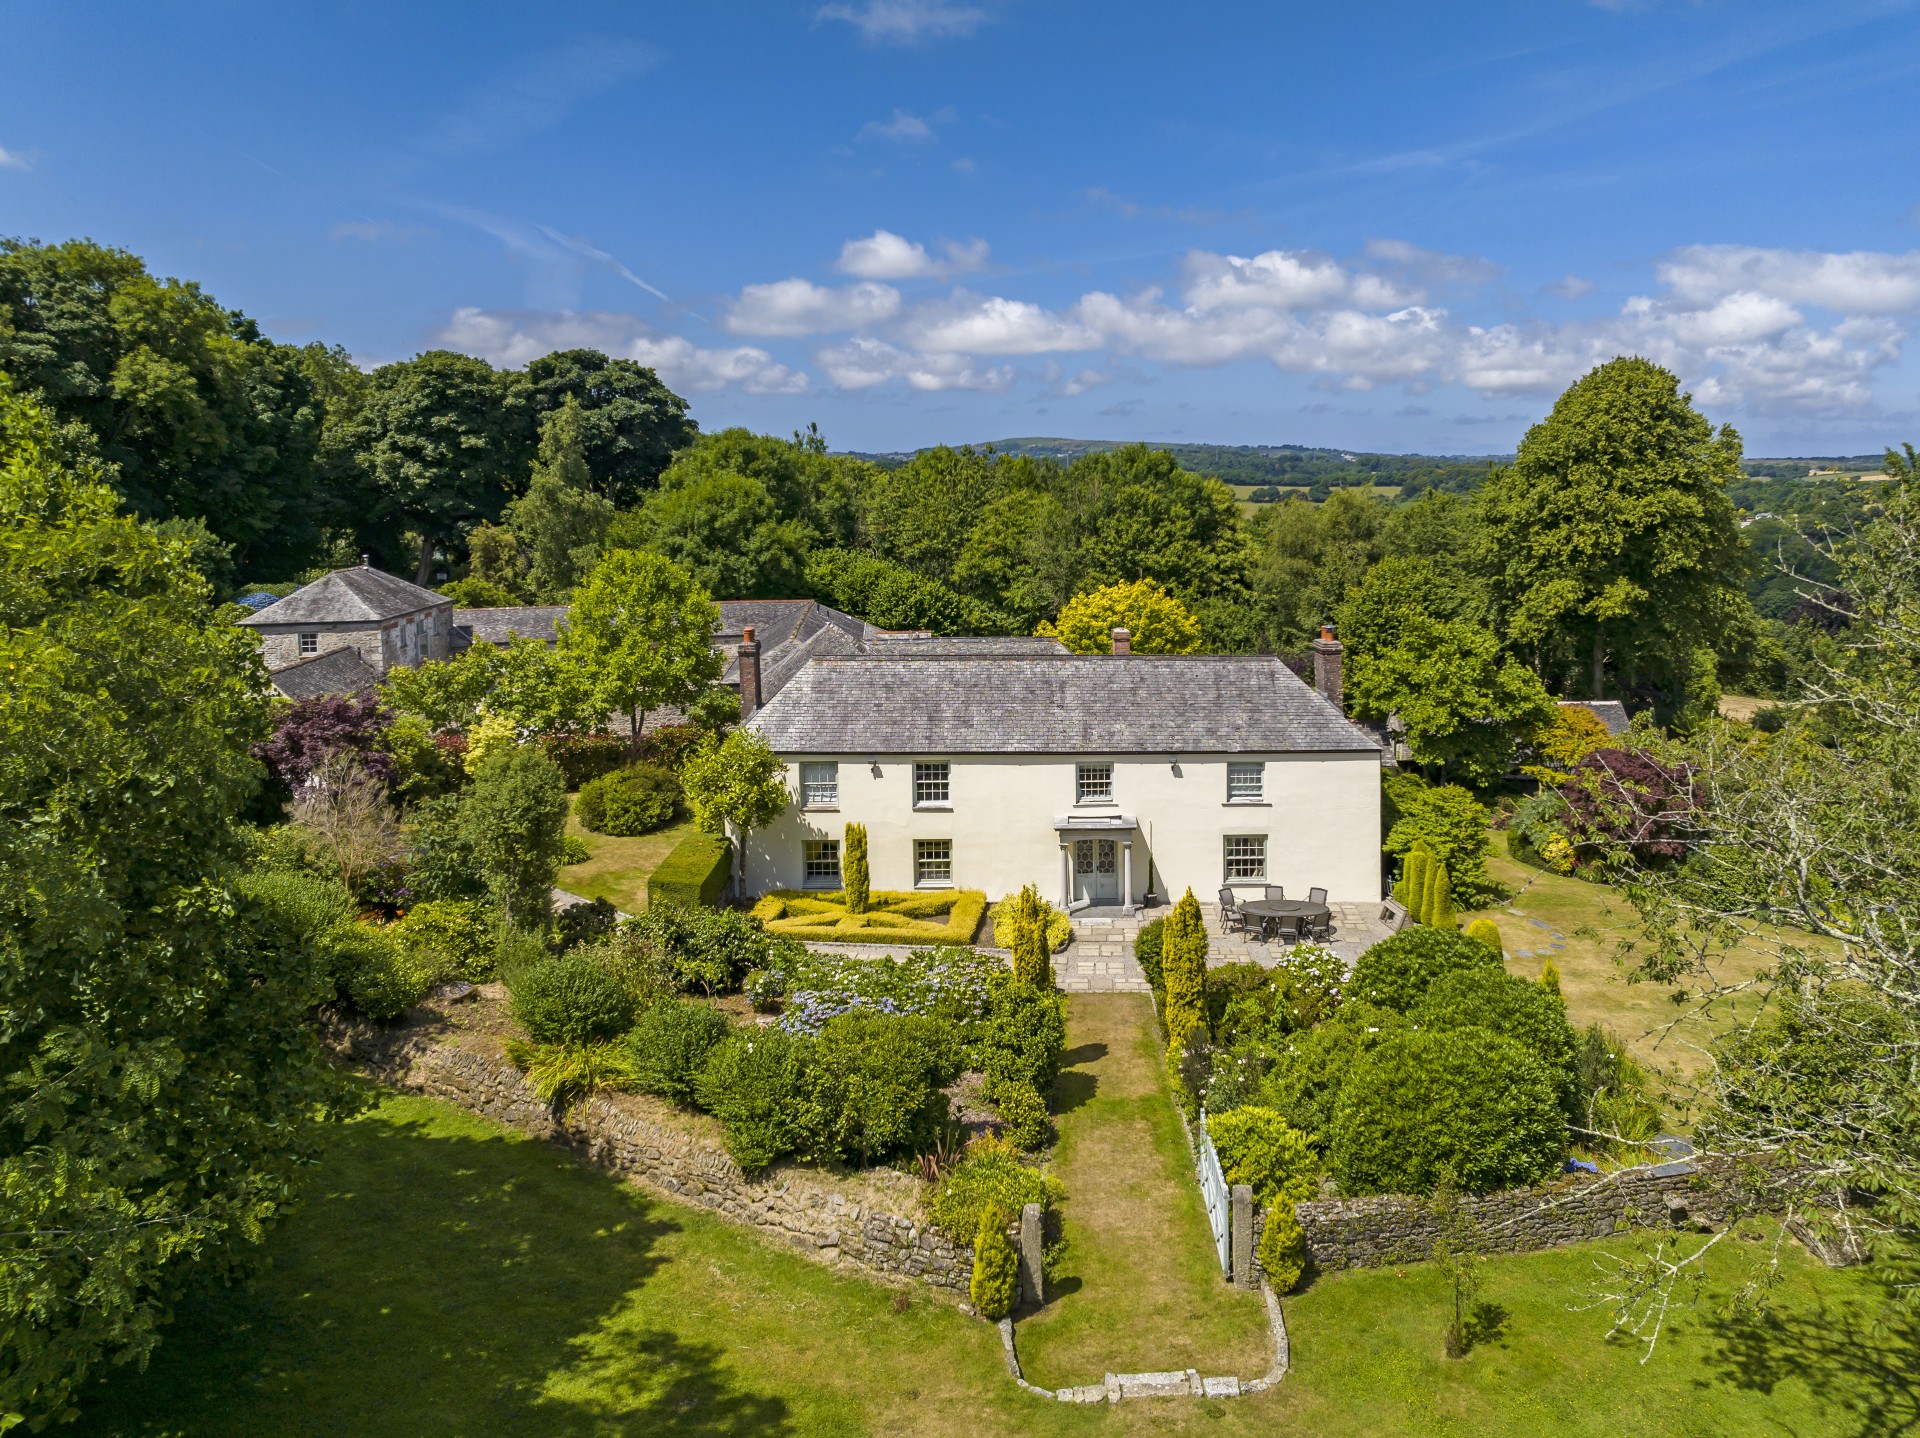 Can’t Decide Between A Dream Home In North Or South Cornwall? This Delightful Mini-Estate Offers The Best Of Both